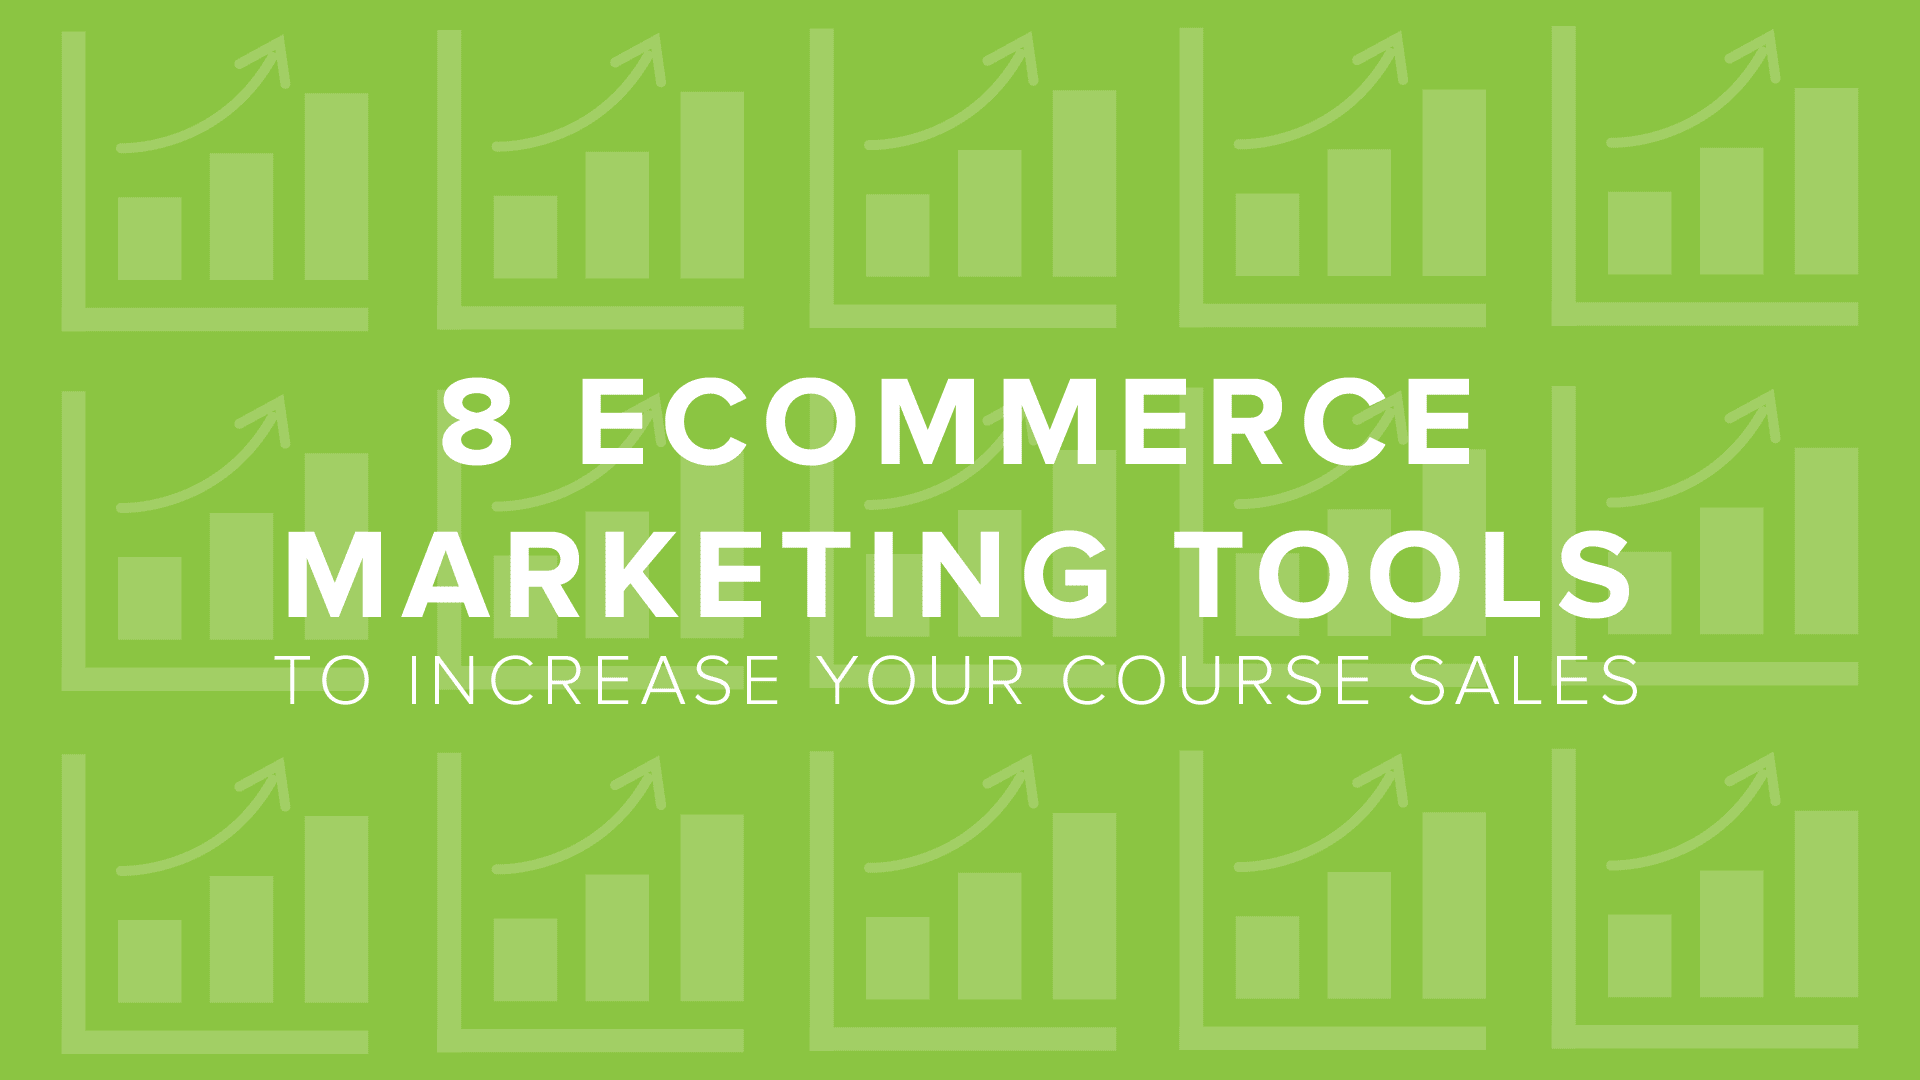 DigitalChalk: 8 eCommerce Marketing Tools to Increase Your Course Sales